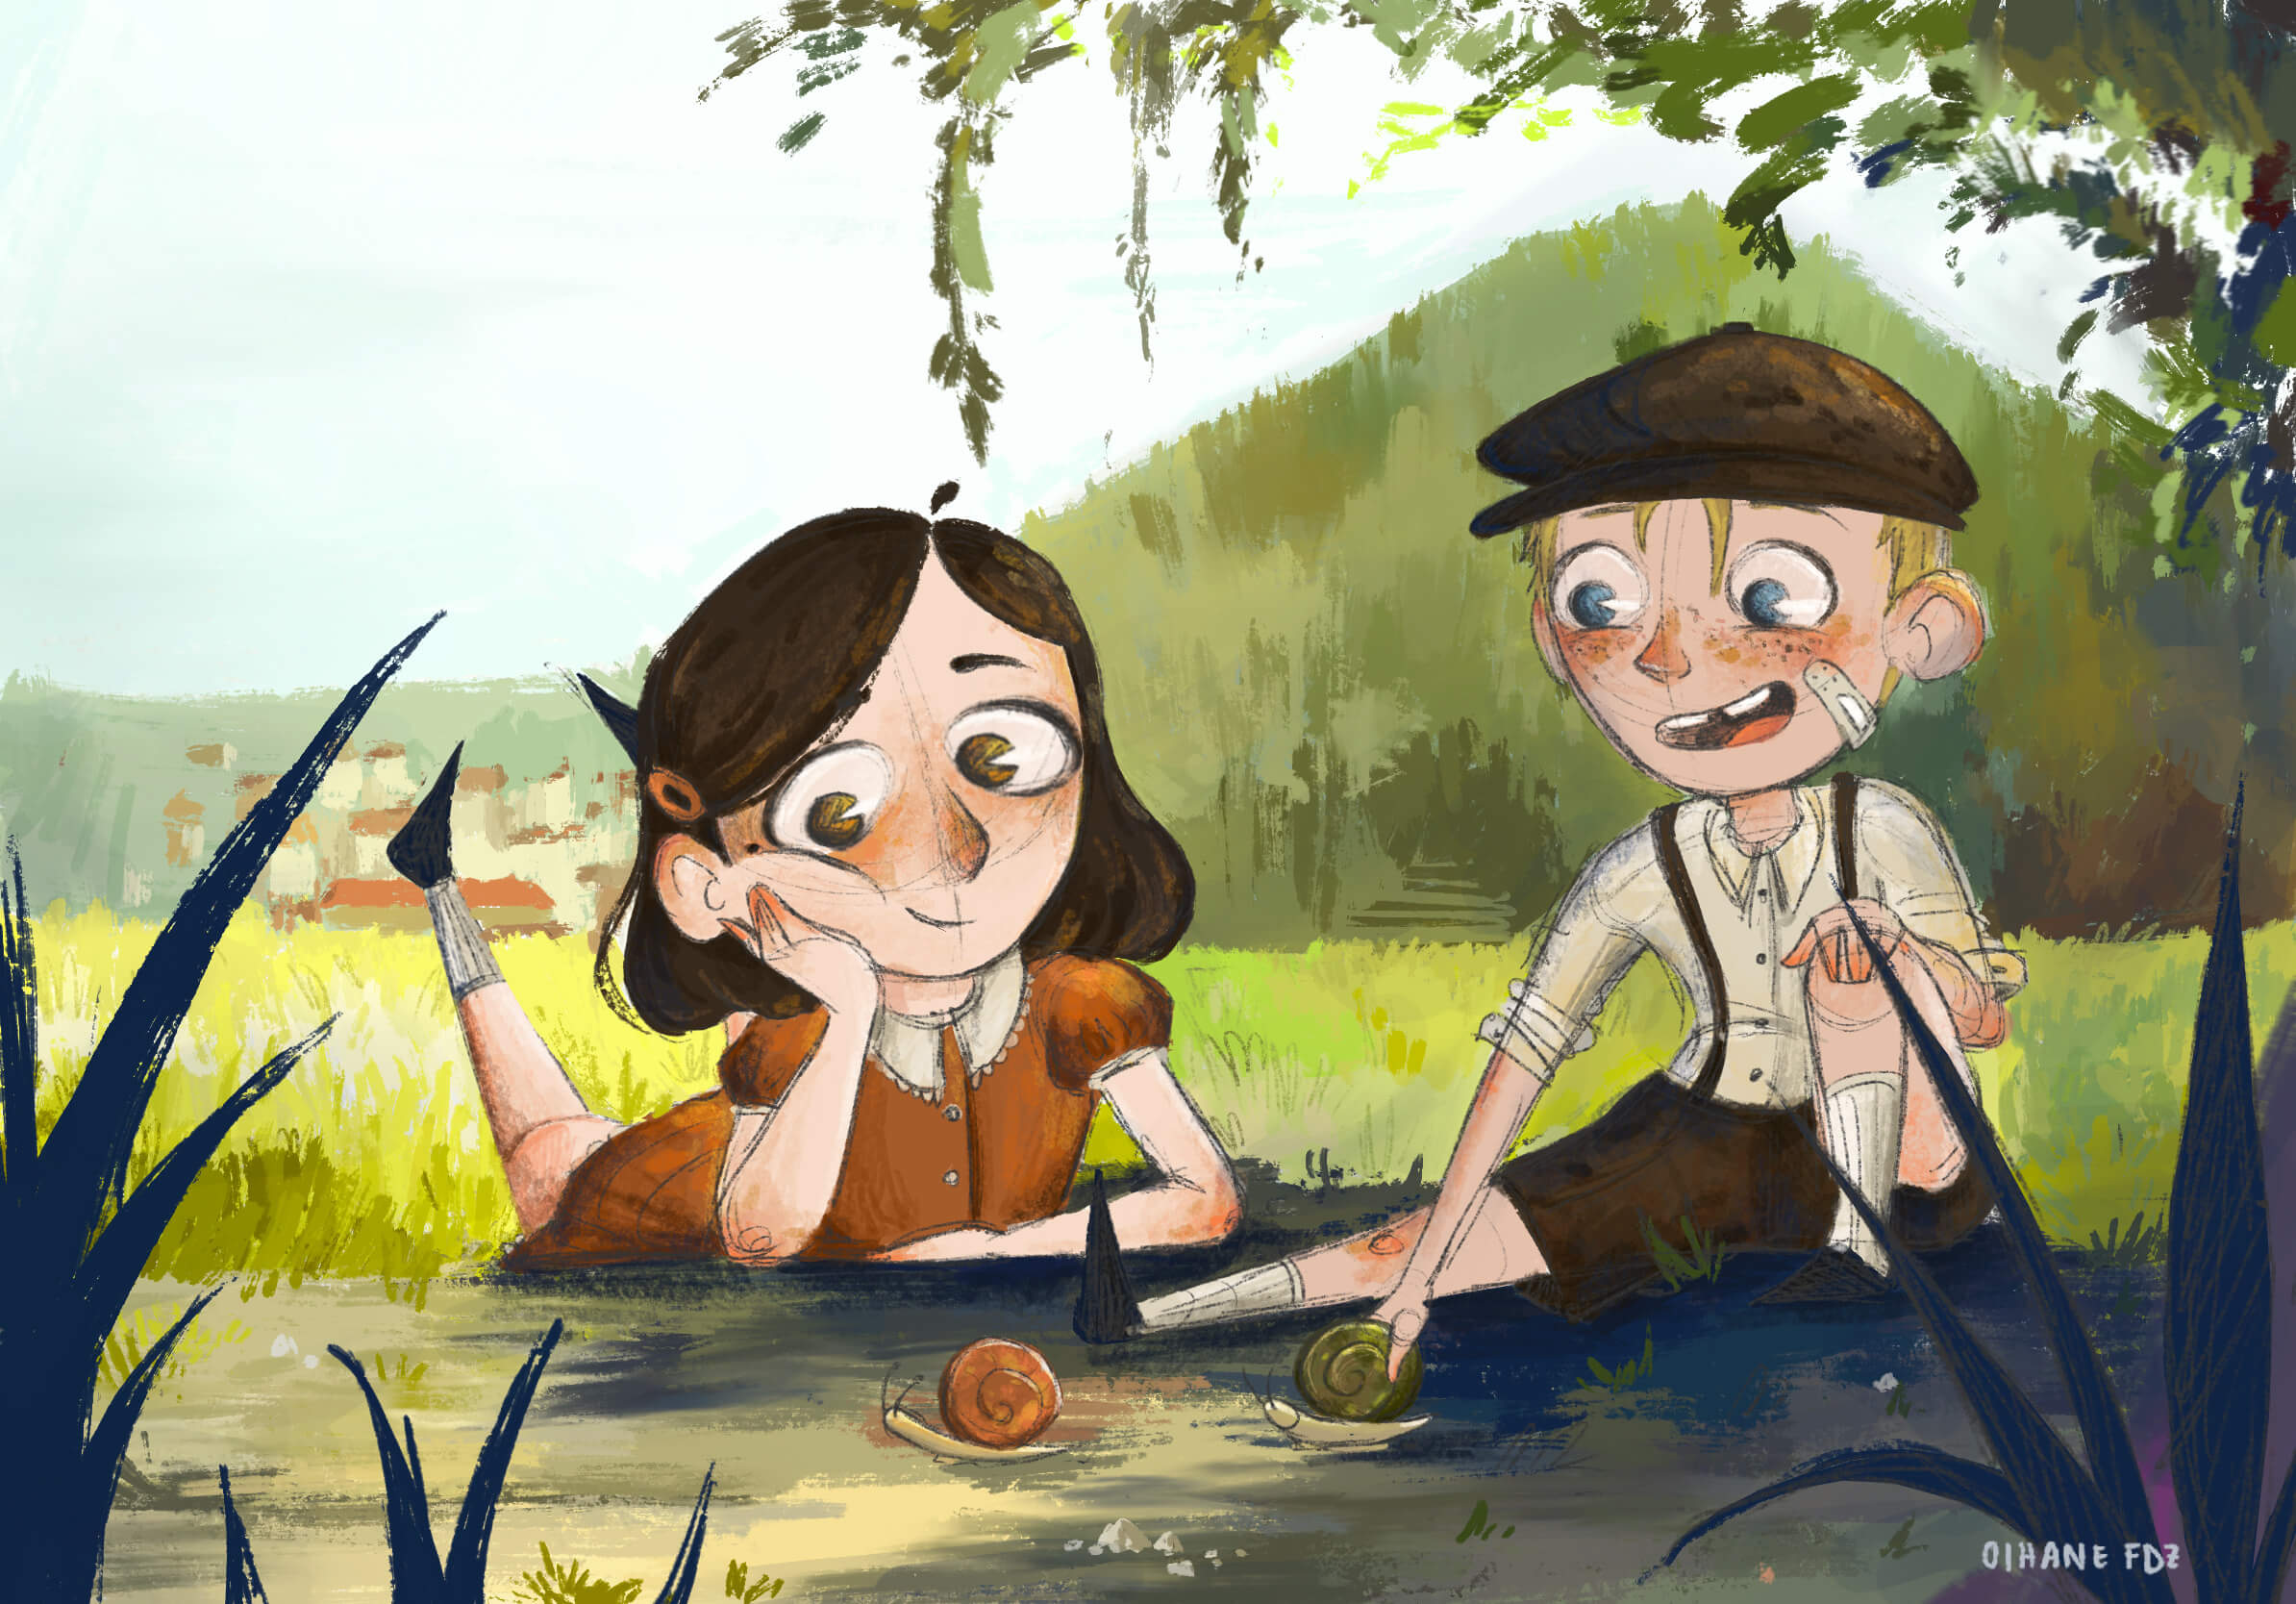 A boy and a girl play in the field, racing snails. It is a memory from their childhood.